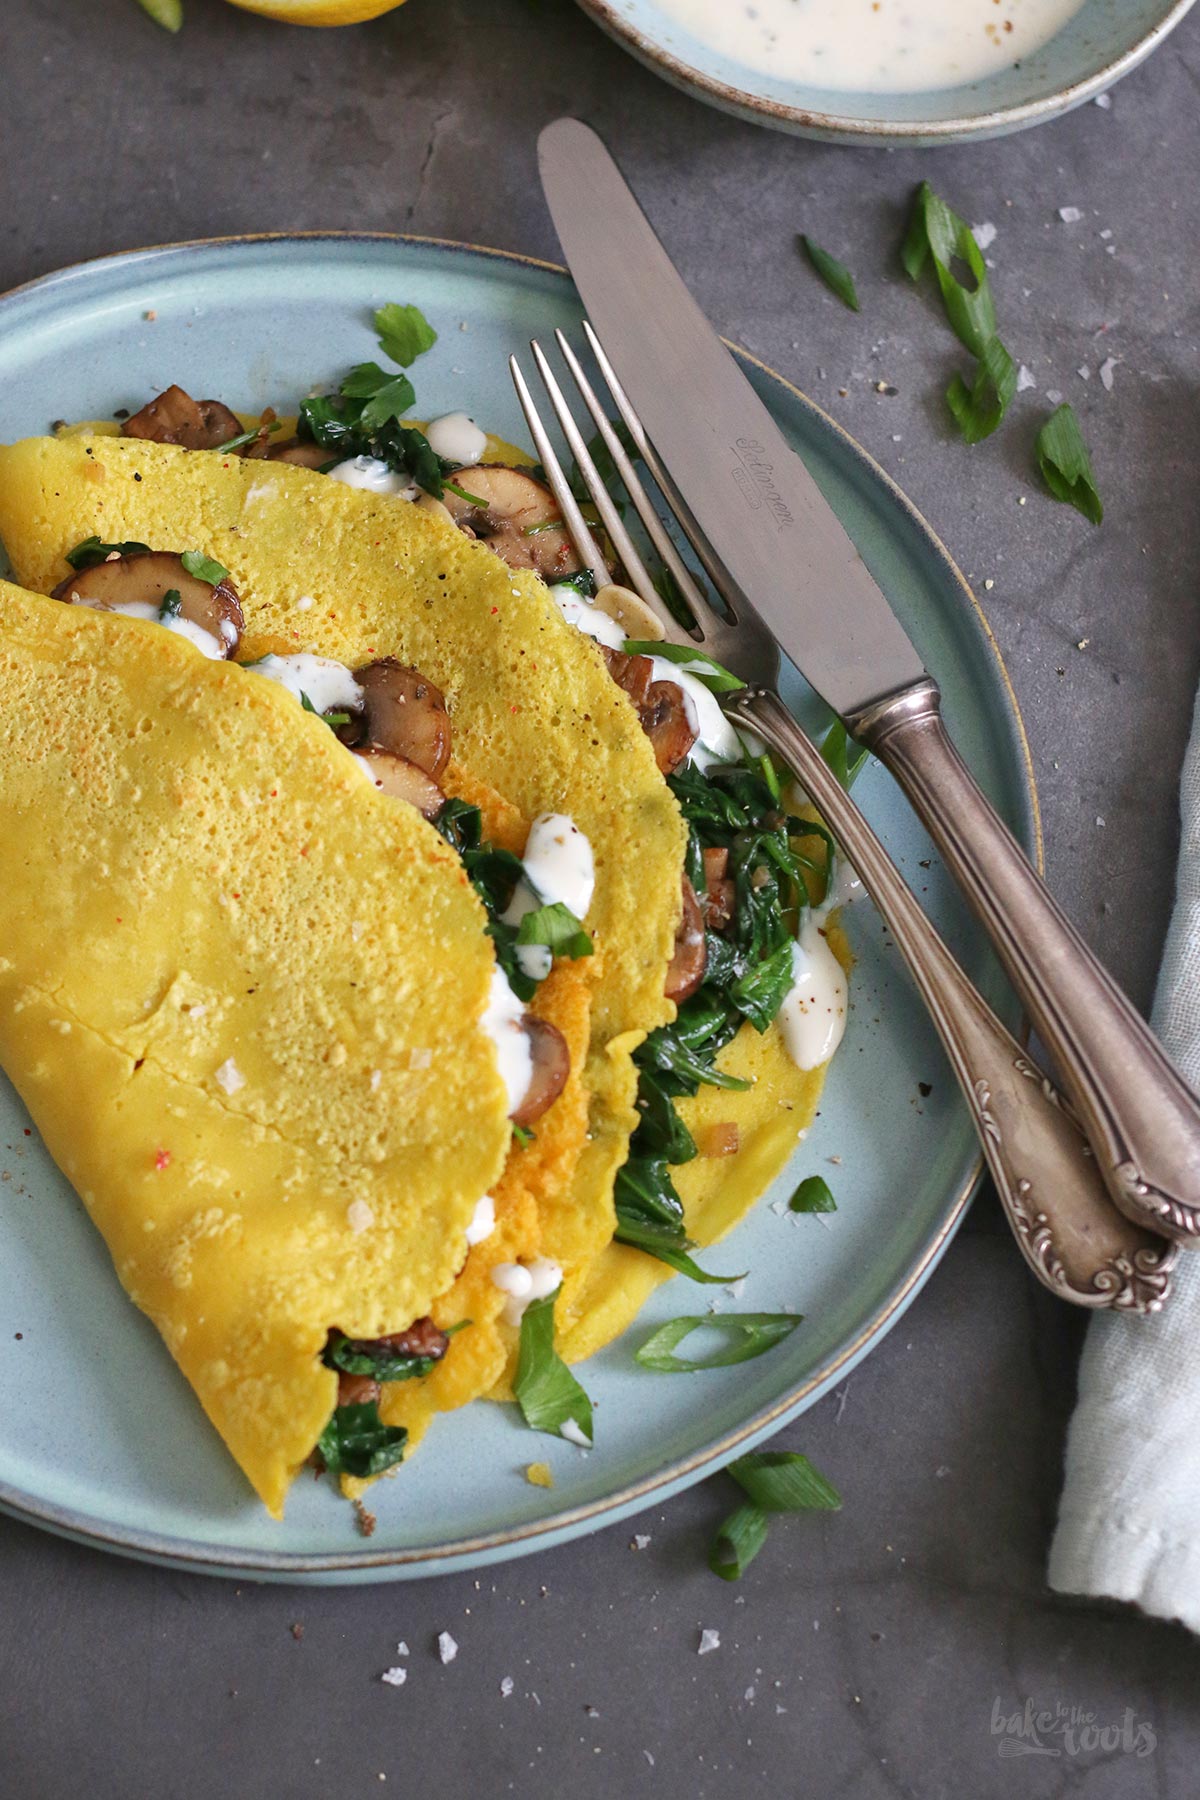 Vegan Chickpea Turmeric Crêpes with Spinach and Mushrooms | Bake to the roots